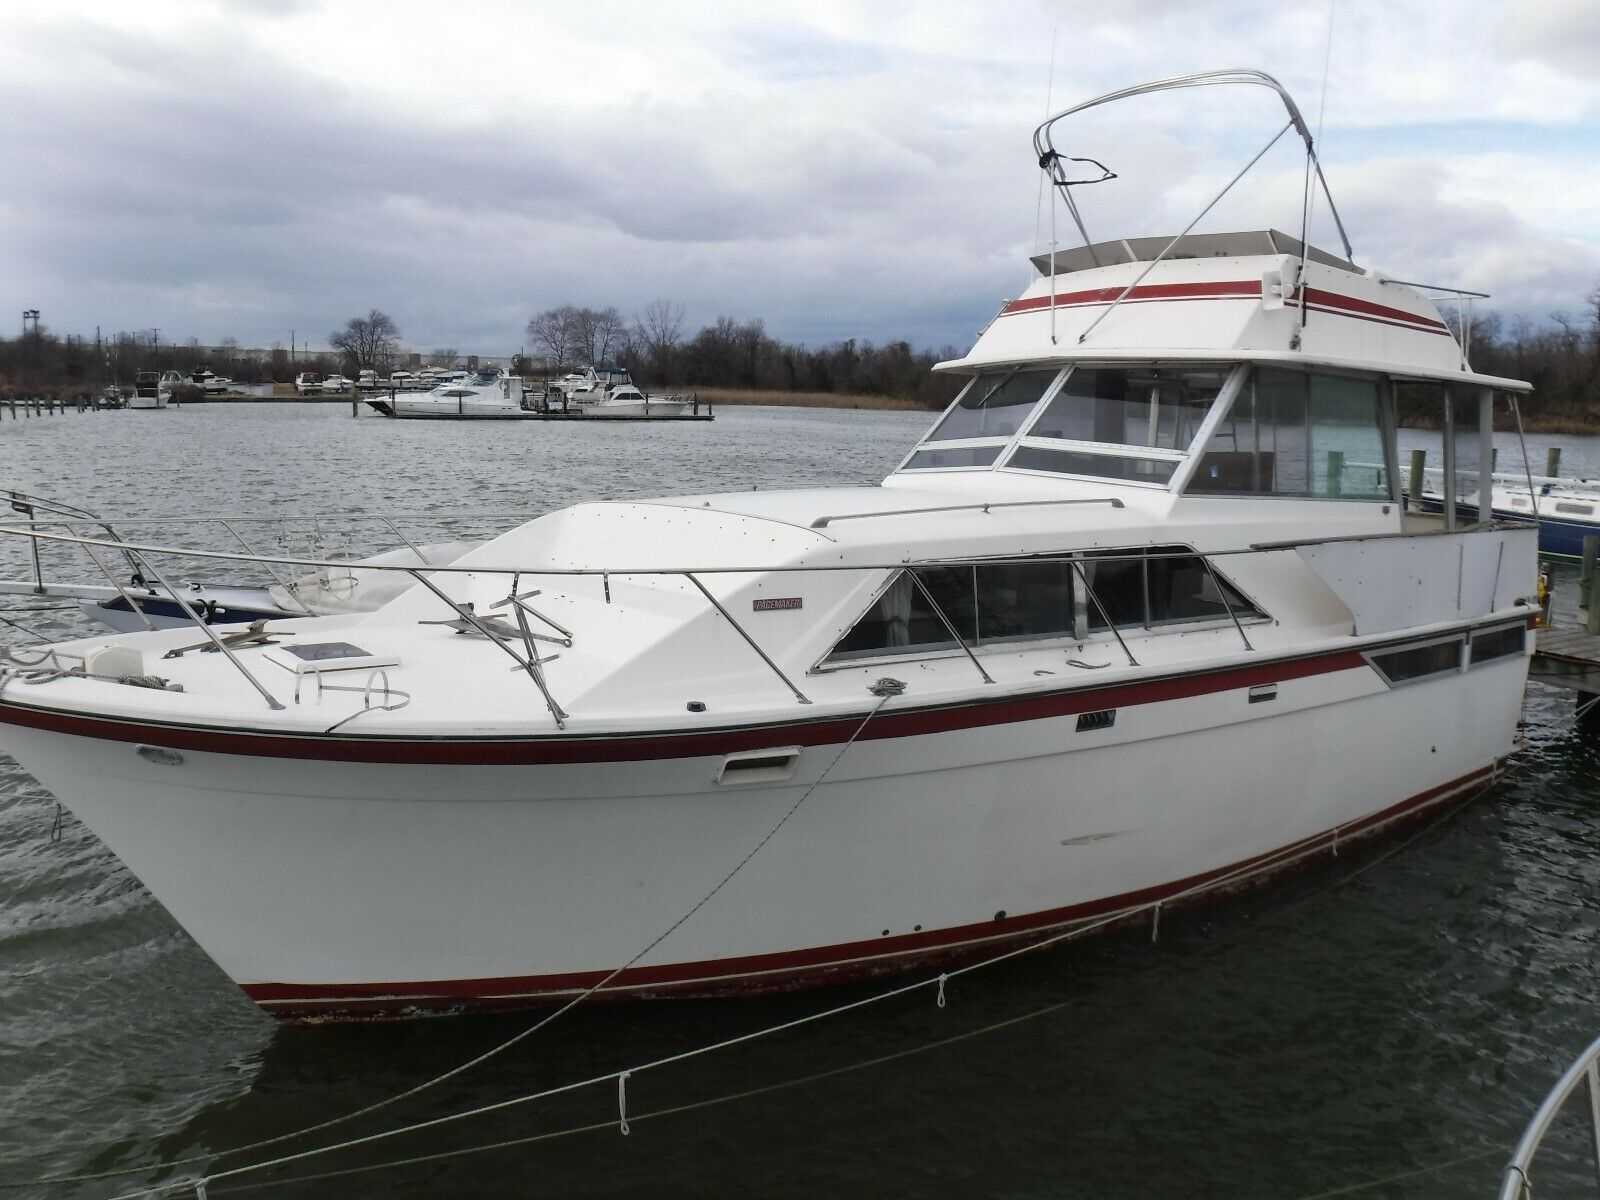 46 pacemaker motor yacht for sale